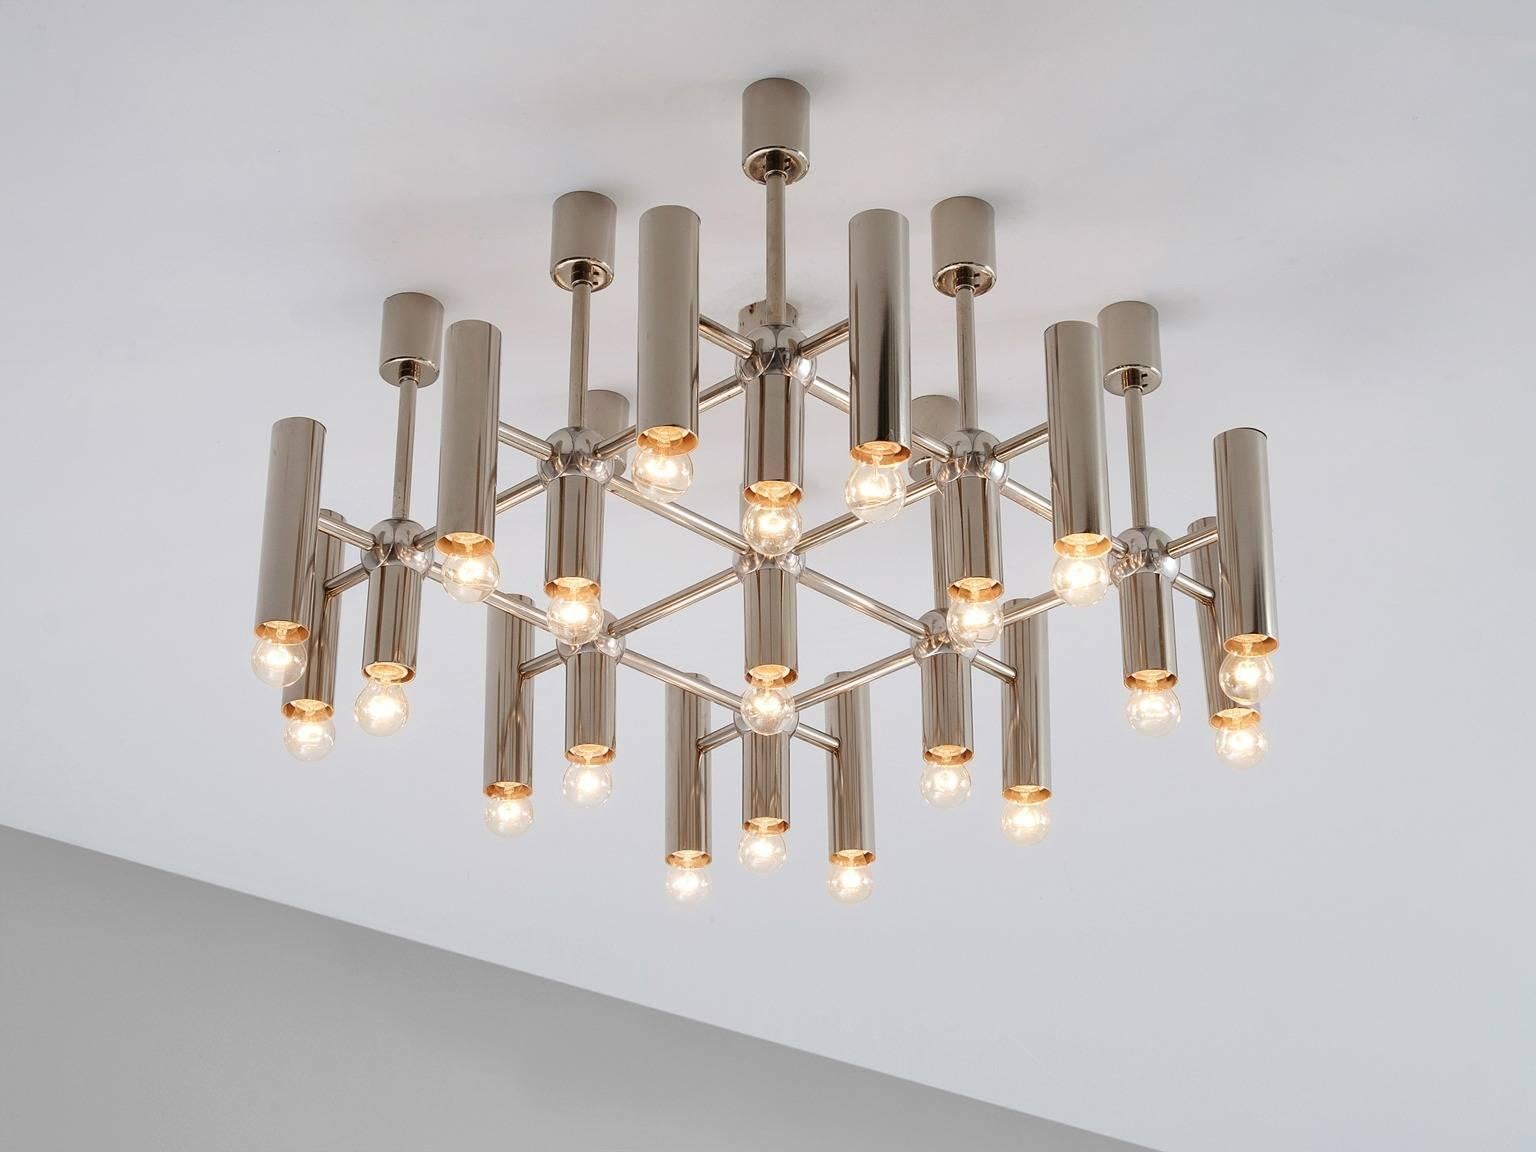 Chandelier, in nickel-plated steel, Germany 1970s. 

Chandelier in nickel-plated steel. Stunning modern design. The chandelier consists of 21 lights, arranged in a symmetrical pattern. The large amount of lights is beautifully reflected by the steel